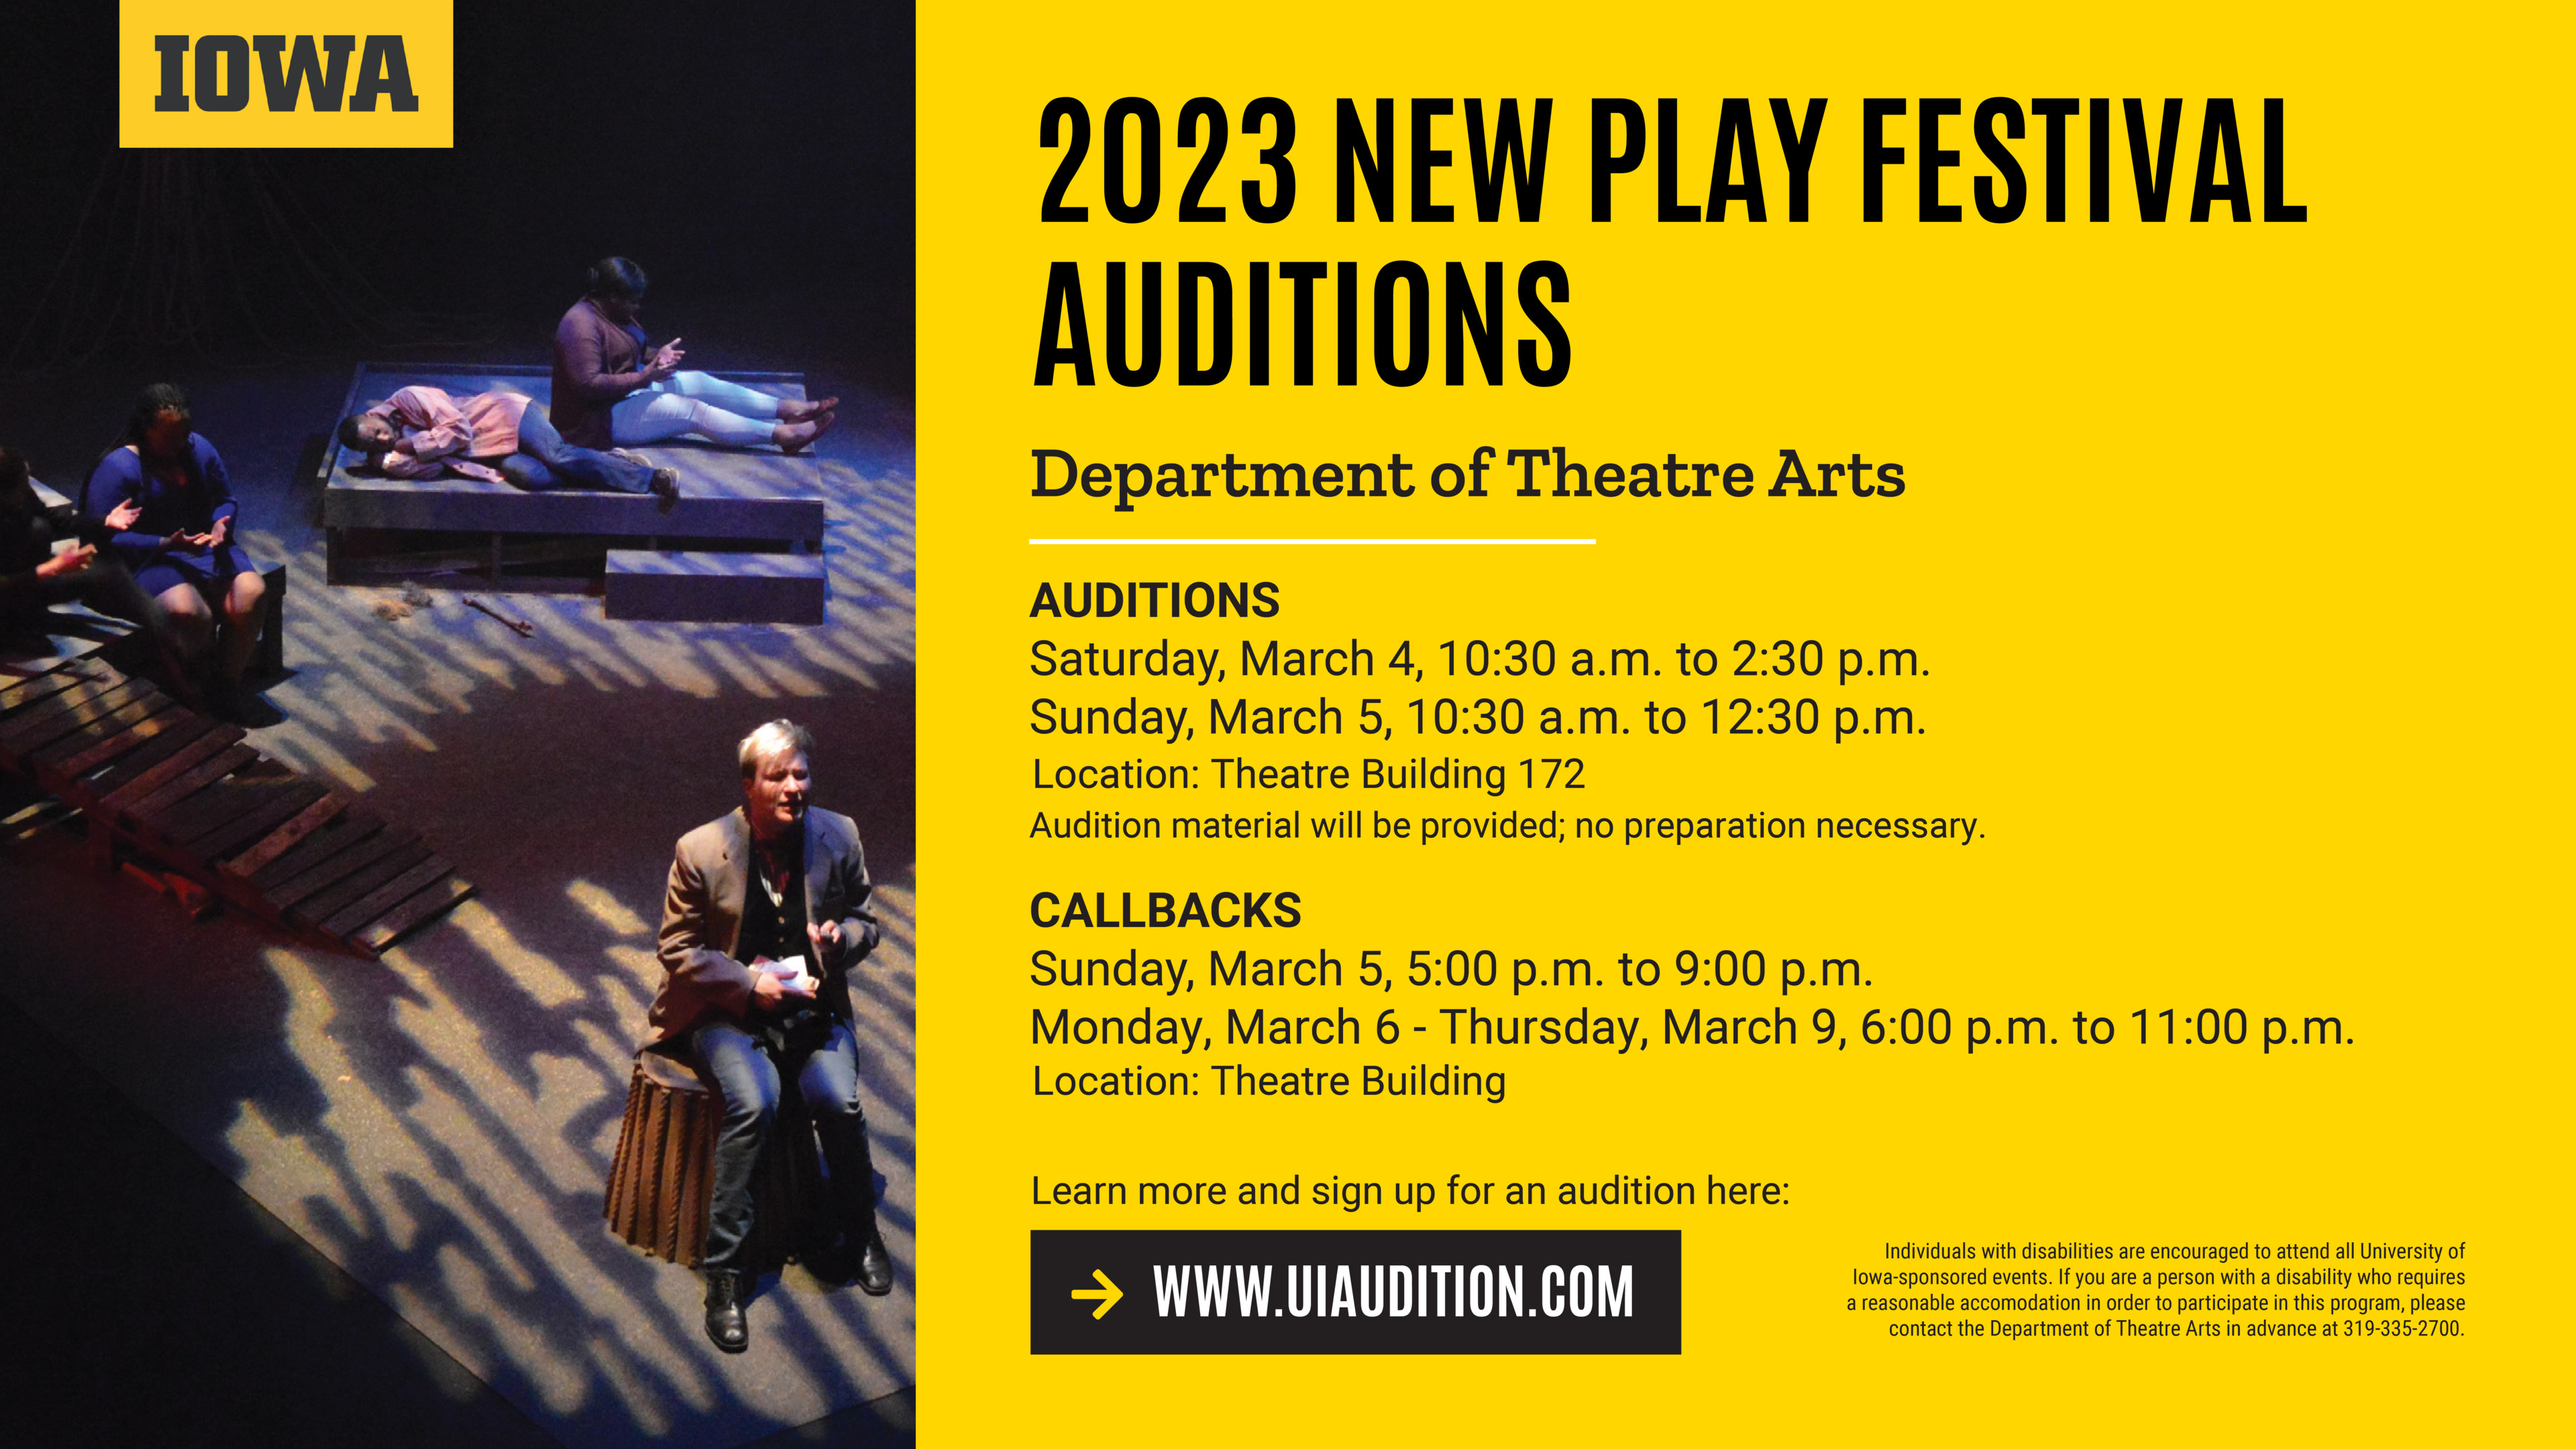 New Play Festival Auditions